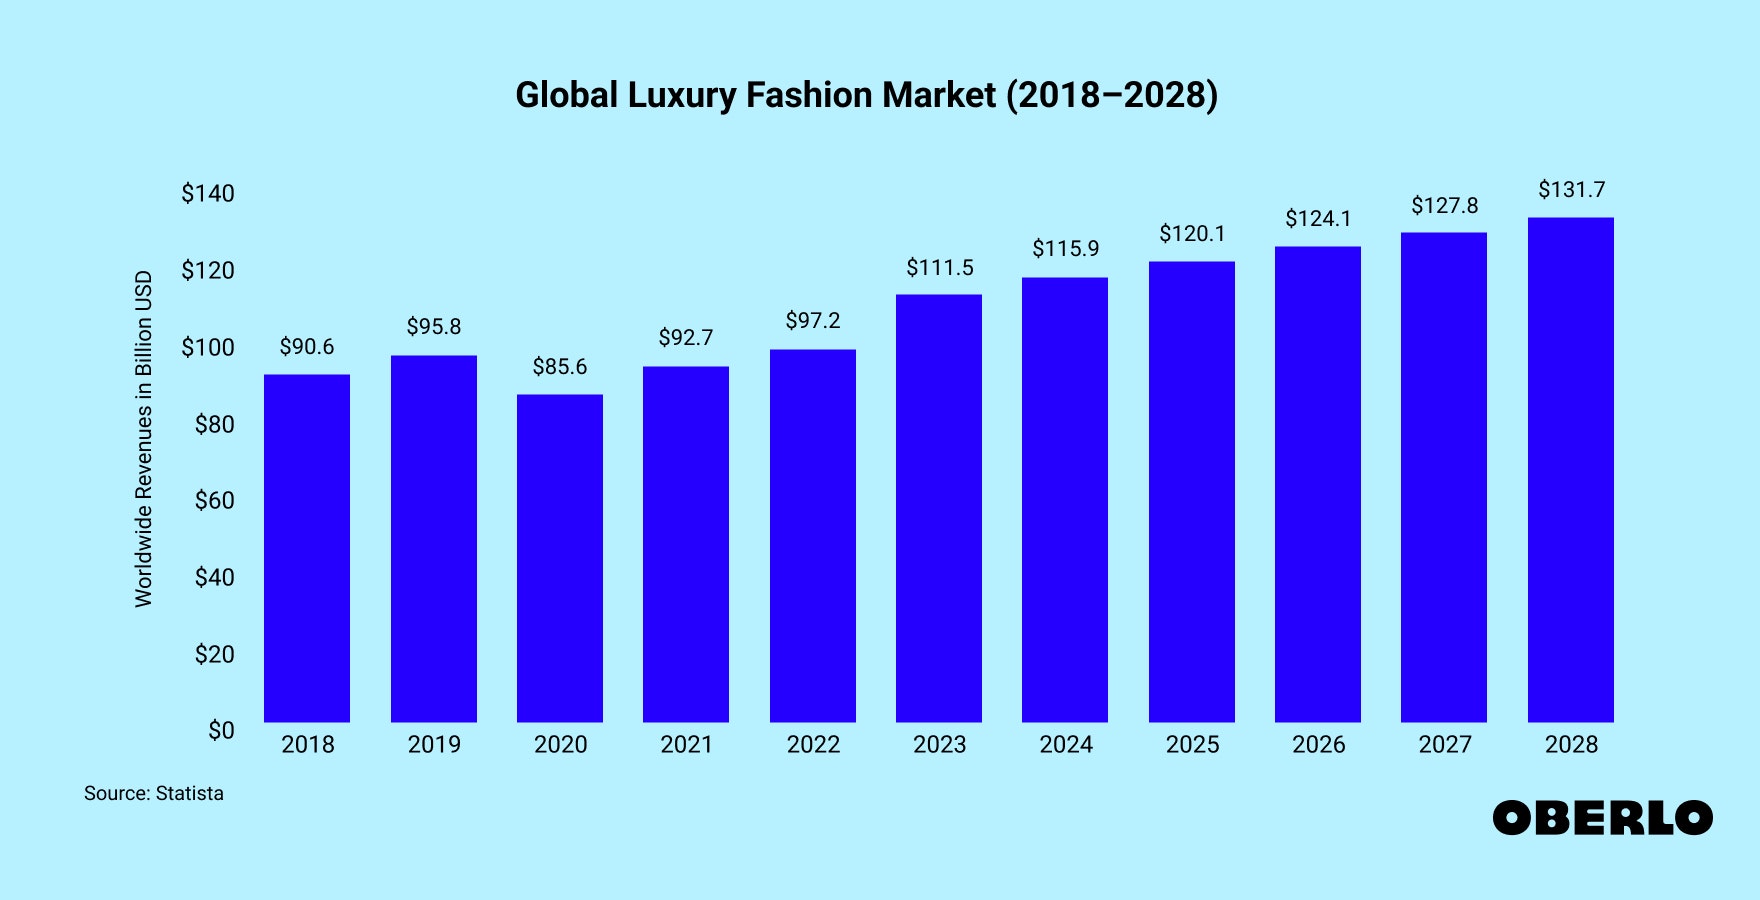 Chart showing the global luxury fashion industry's annual revenues